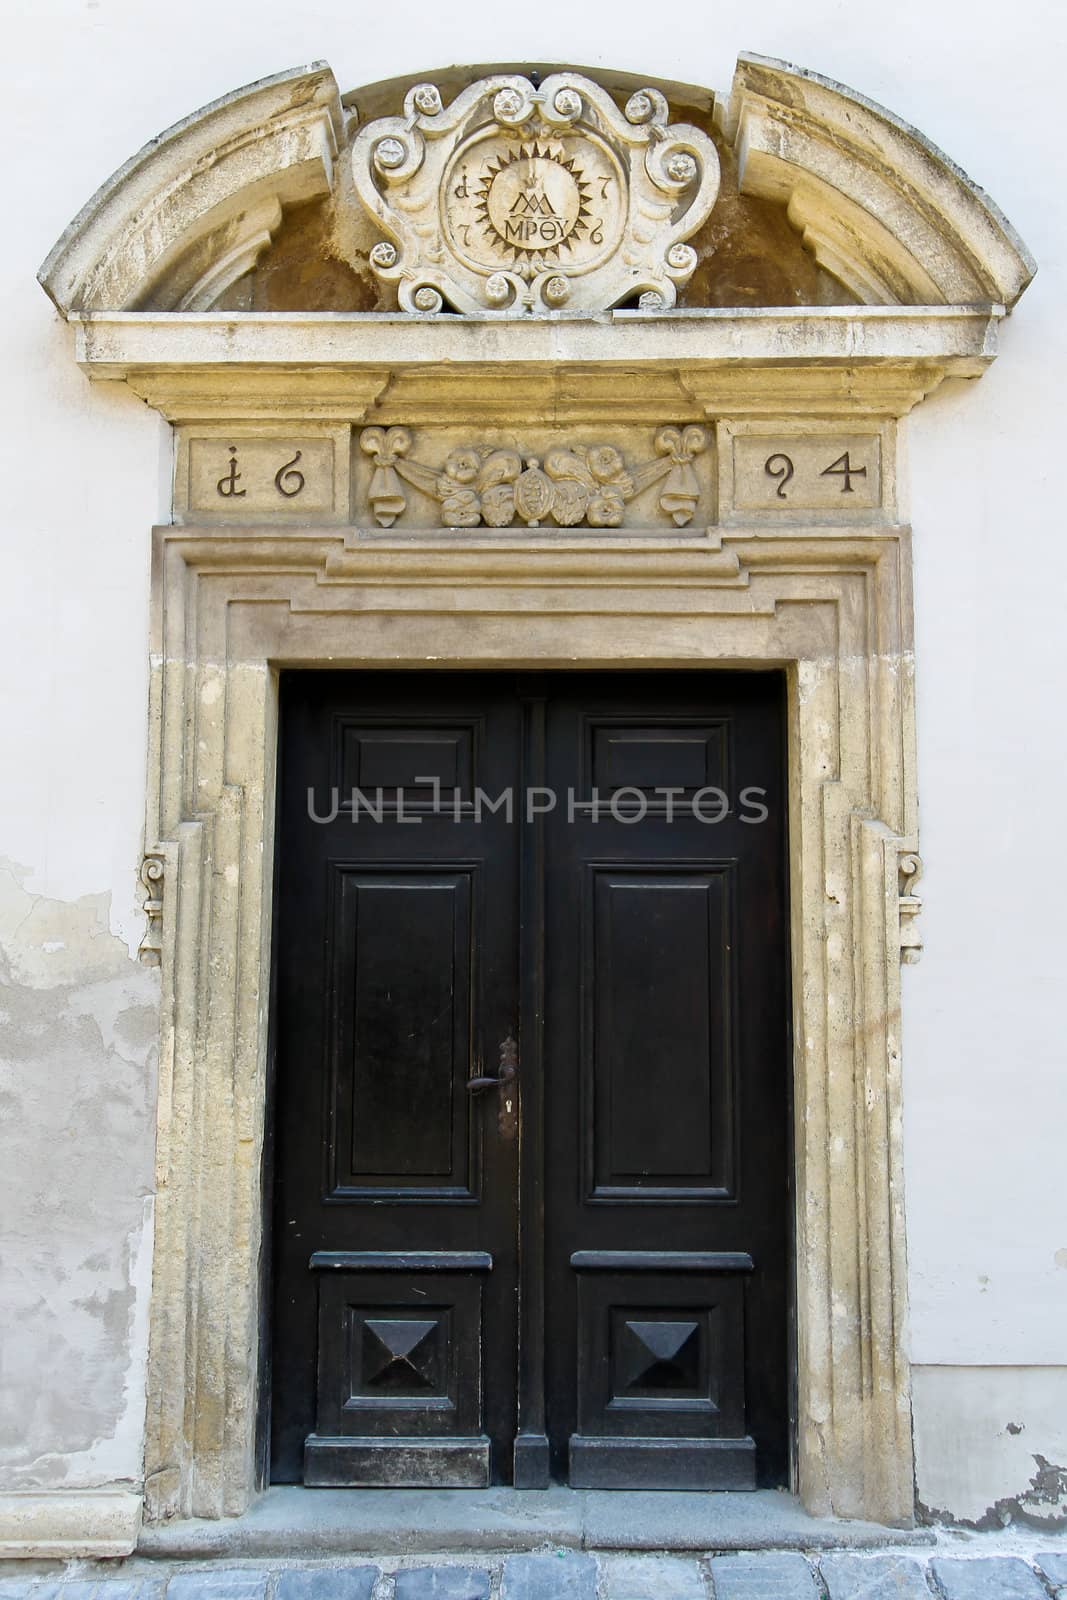 An old entrance to a public catholic school in lower austria